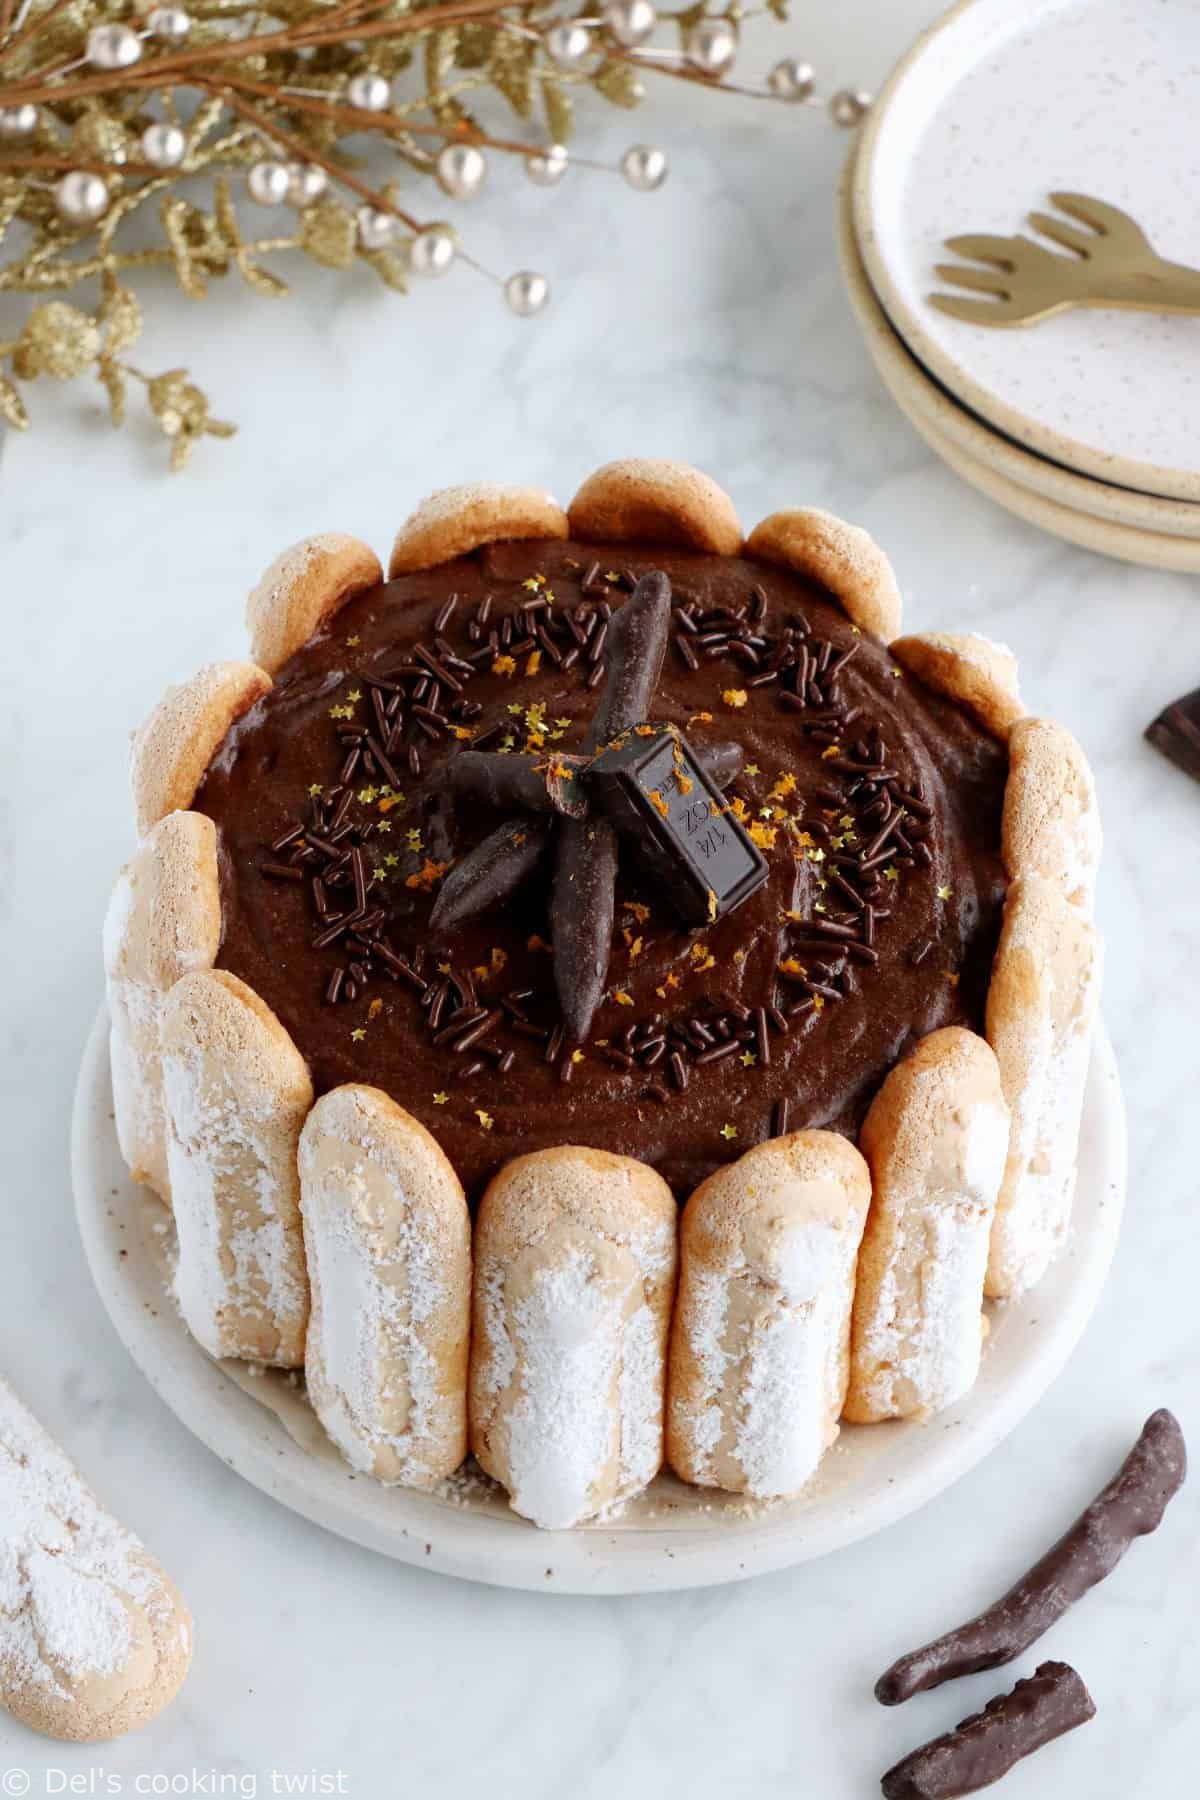 The French chocolate charlotte is an elegant no-bake dessert featuring Ladyfingers and a rich chocolate mousse.